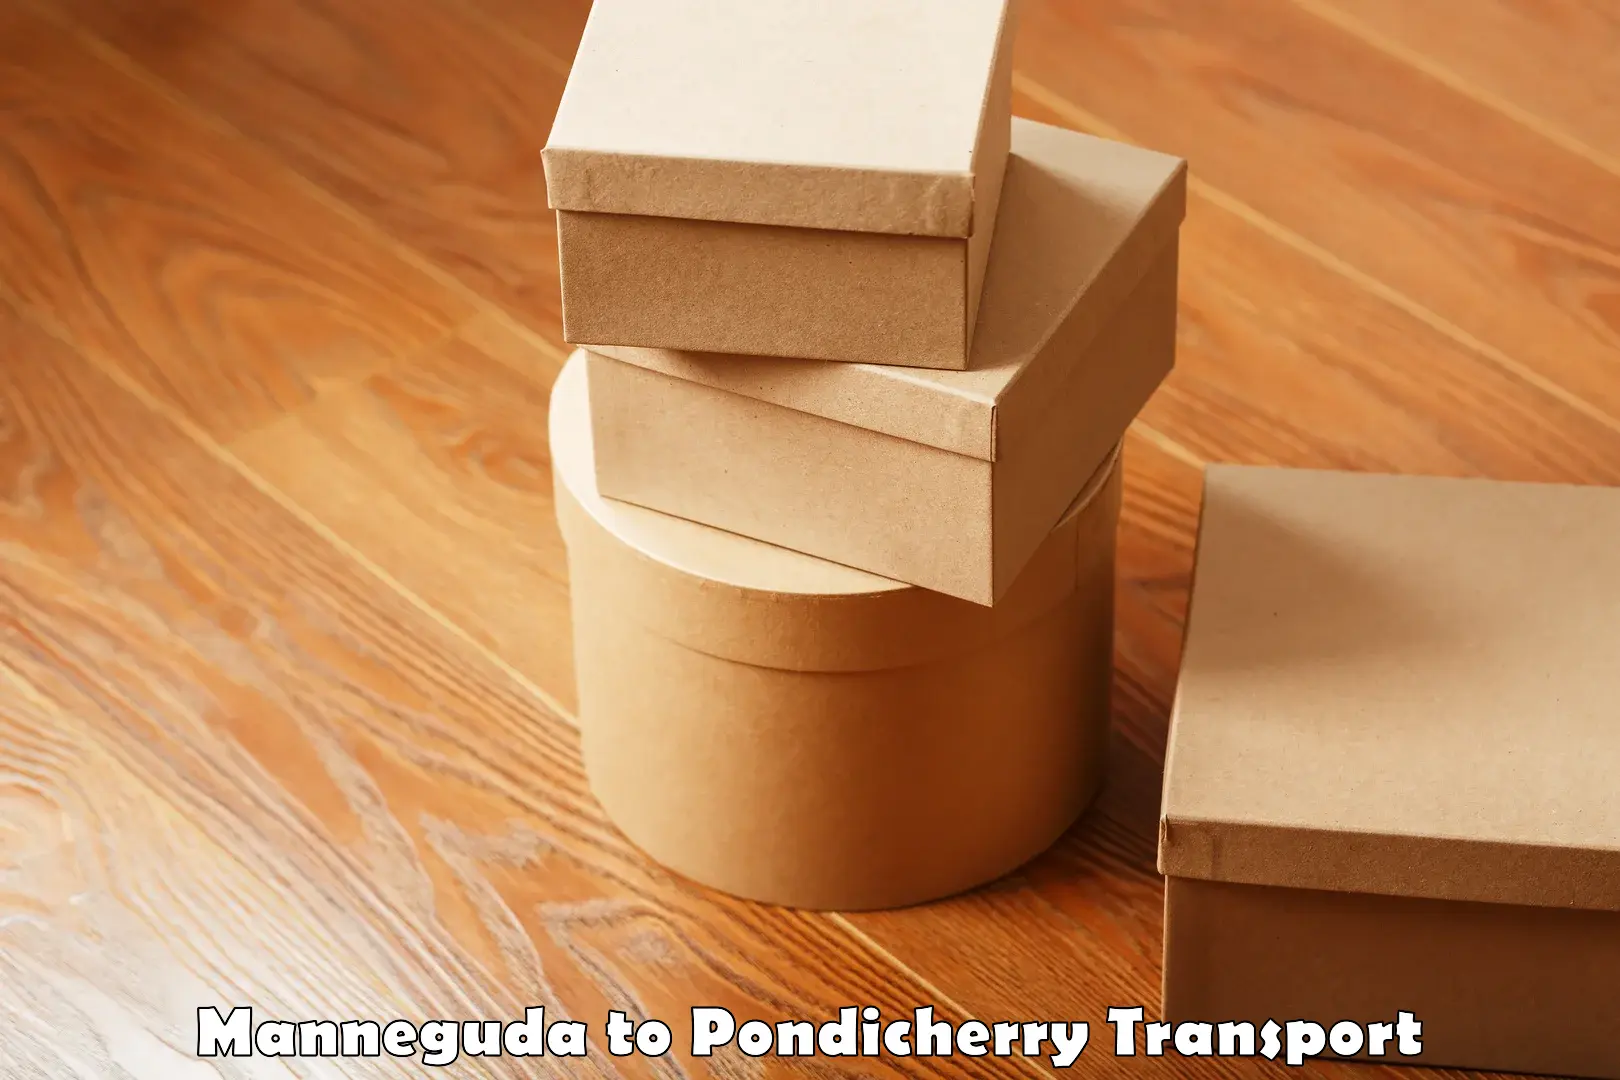 Part load transport service in India Manneguda to Pondicherry University